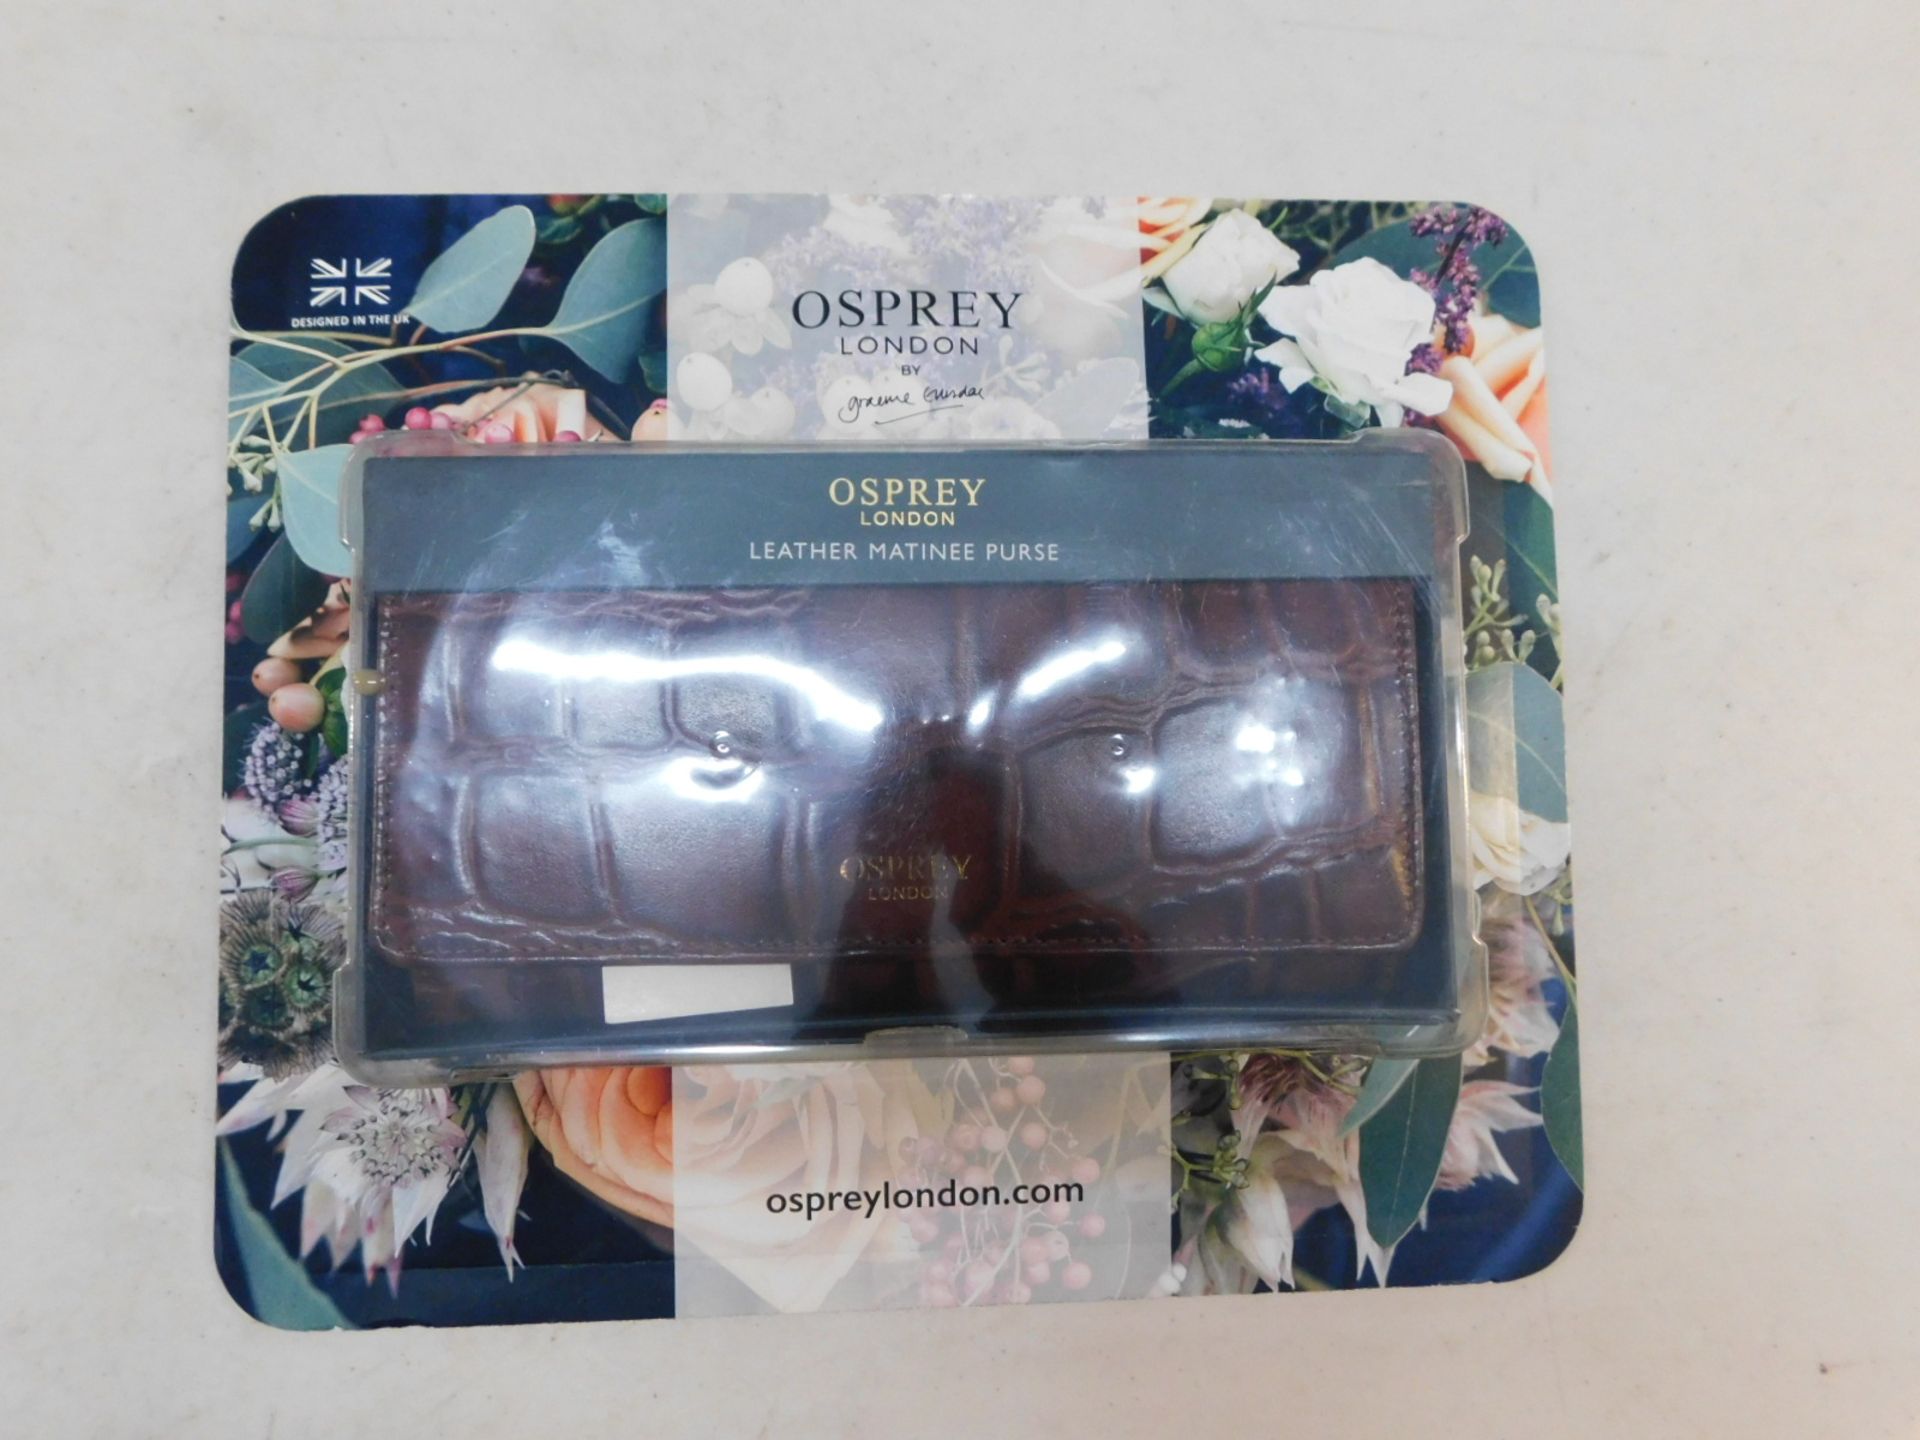 1 BOXED OSPREY WOMENS LEATHER MATINEE PURSE RRP Â£34.99